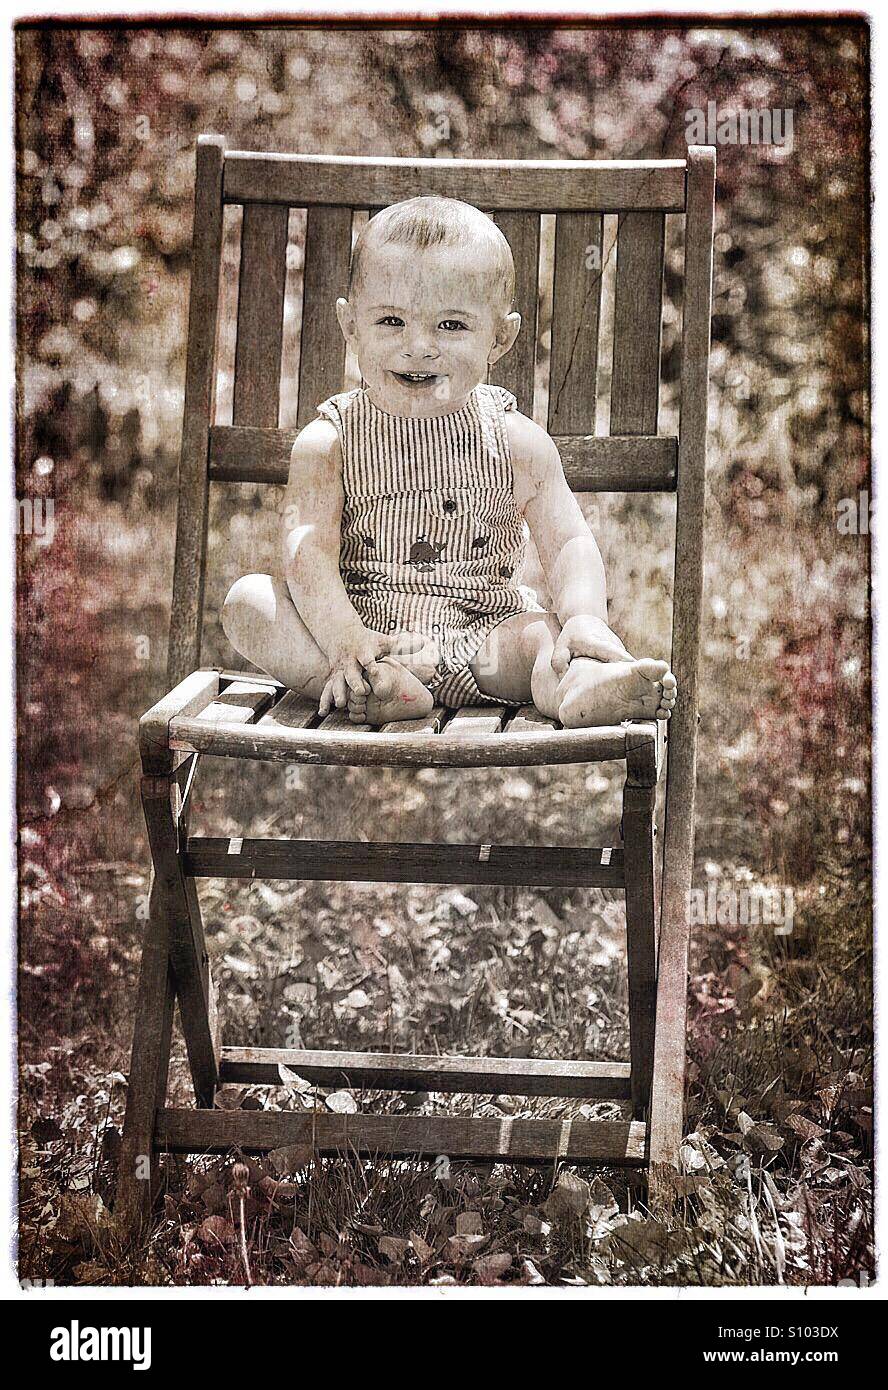 Baby with big smile sitting on chair outside. Stock Photo